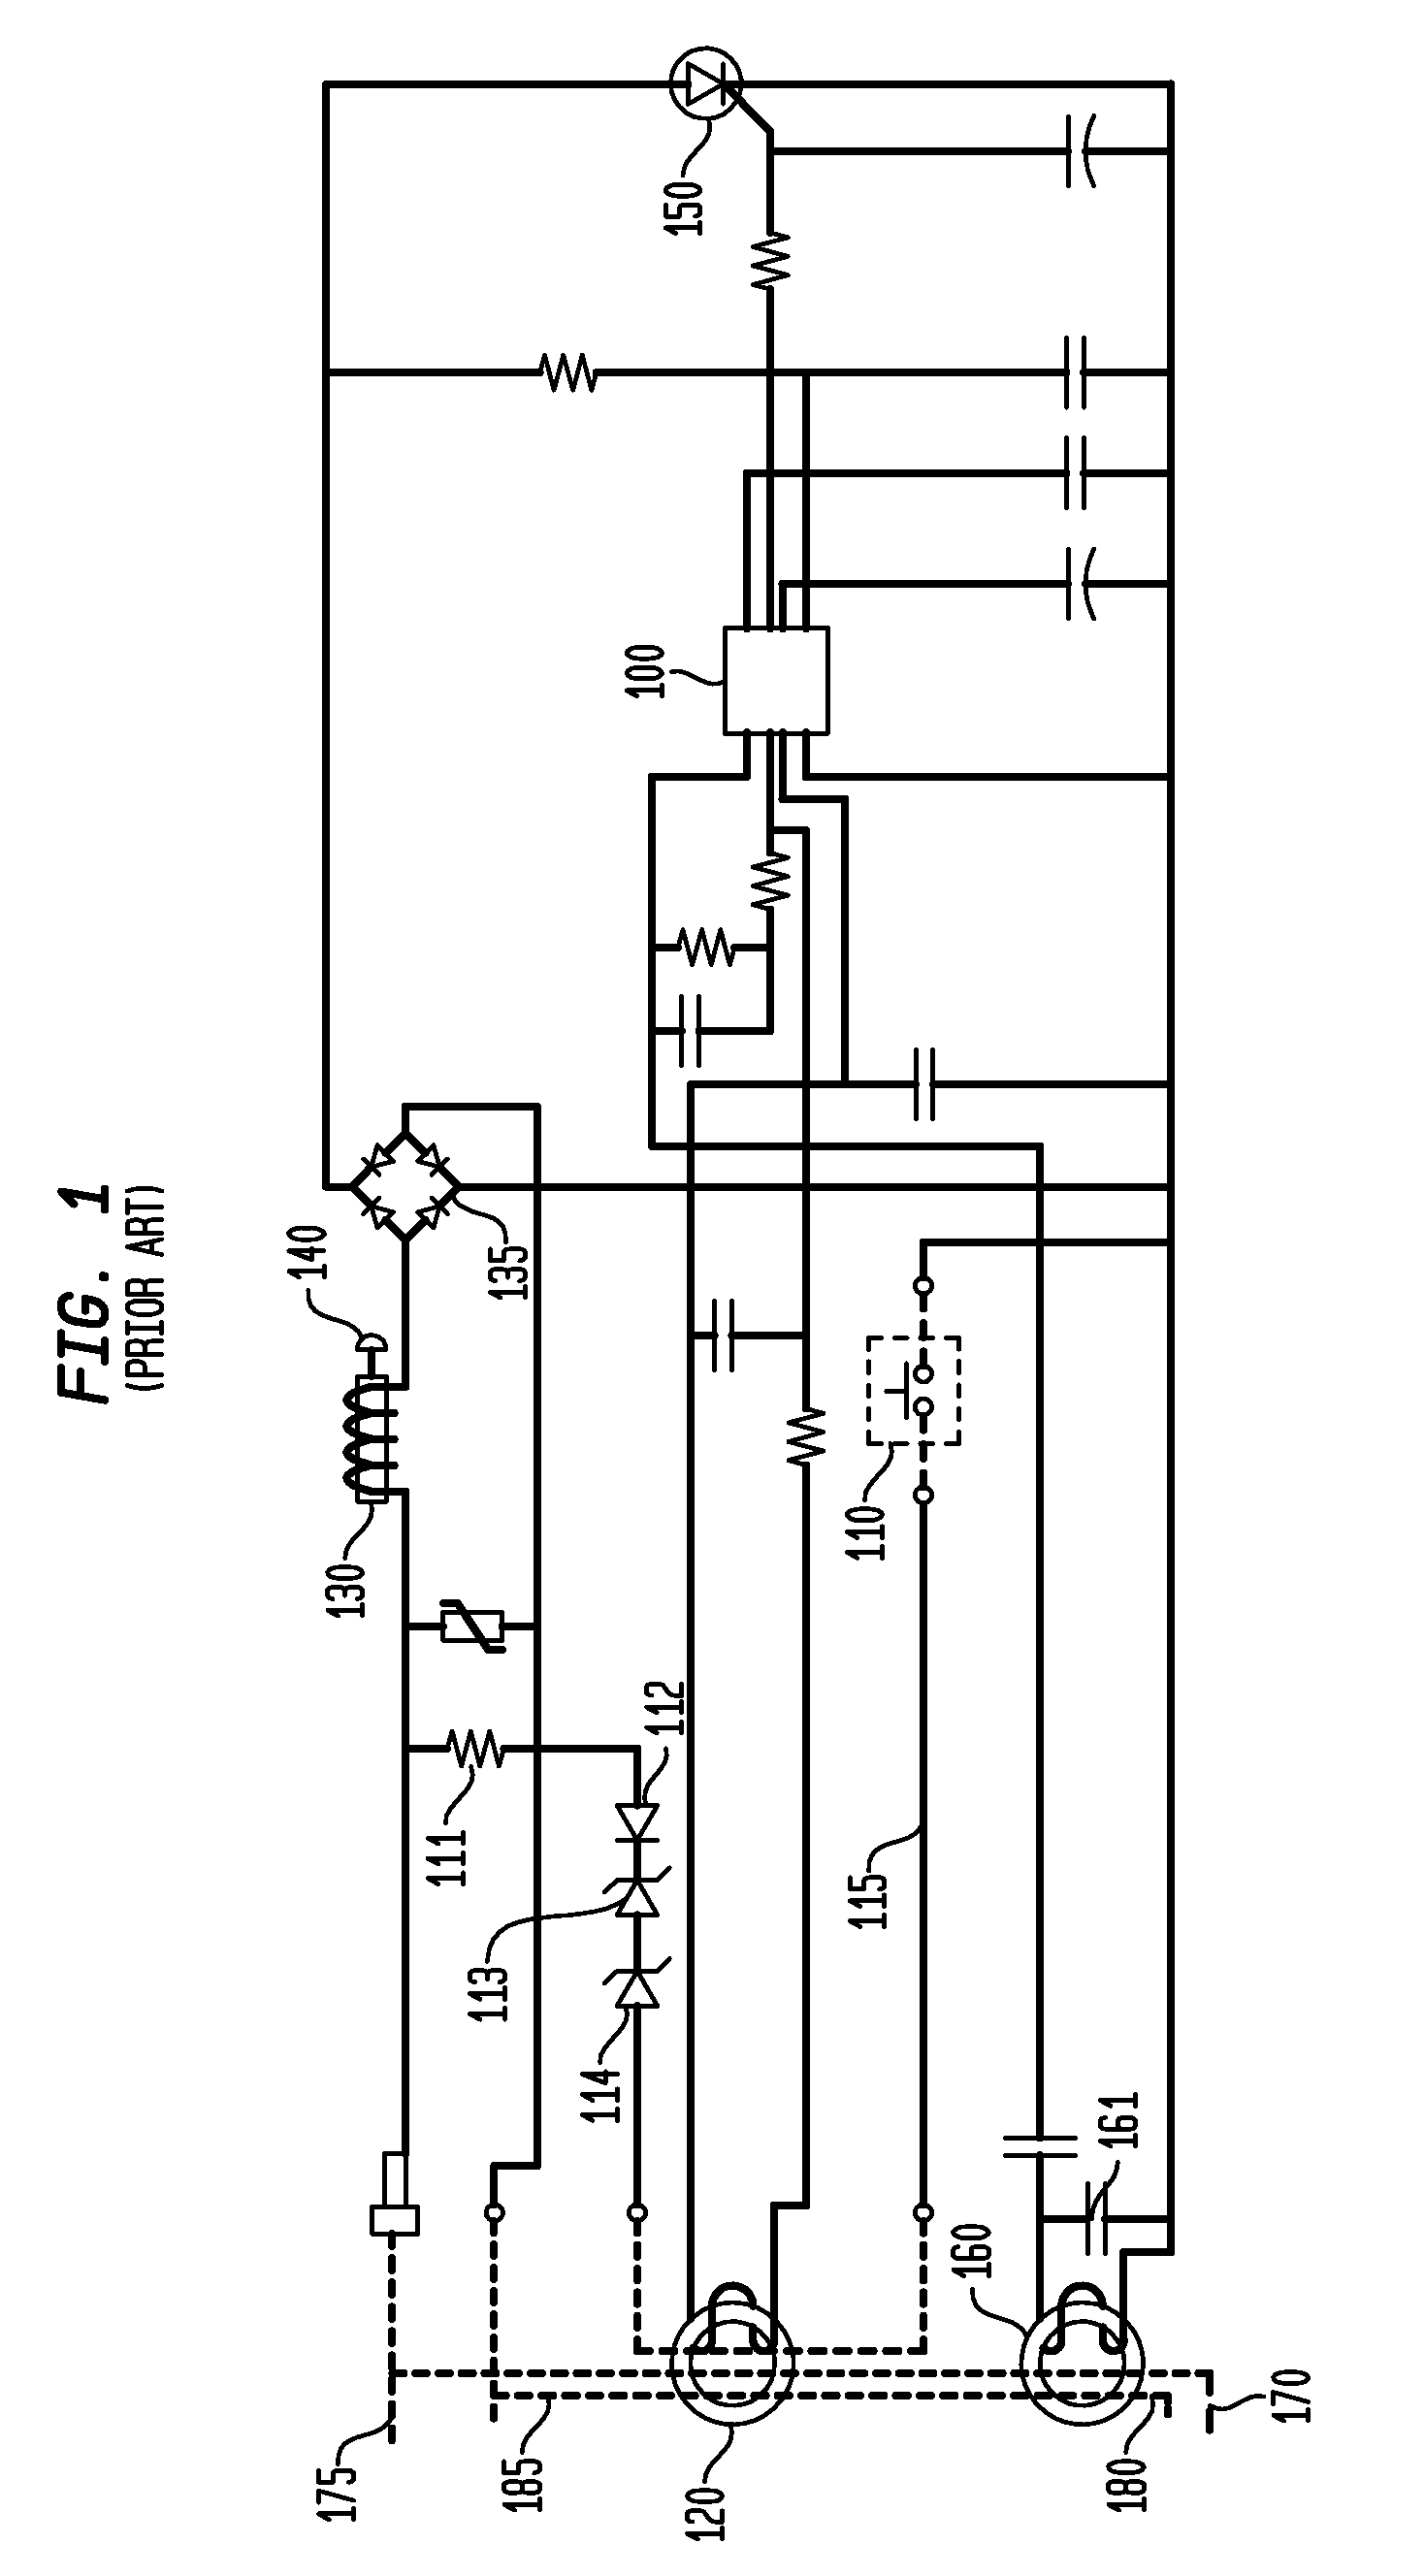 Device, System and Method For Automatic Self-Test For A Ground Fault Interrupter